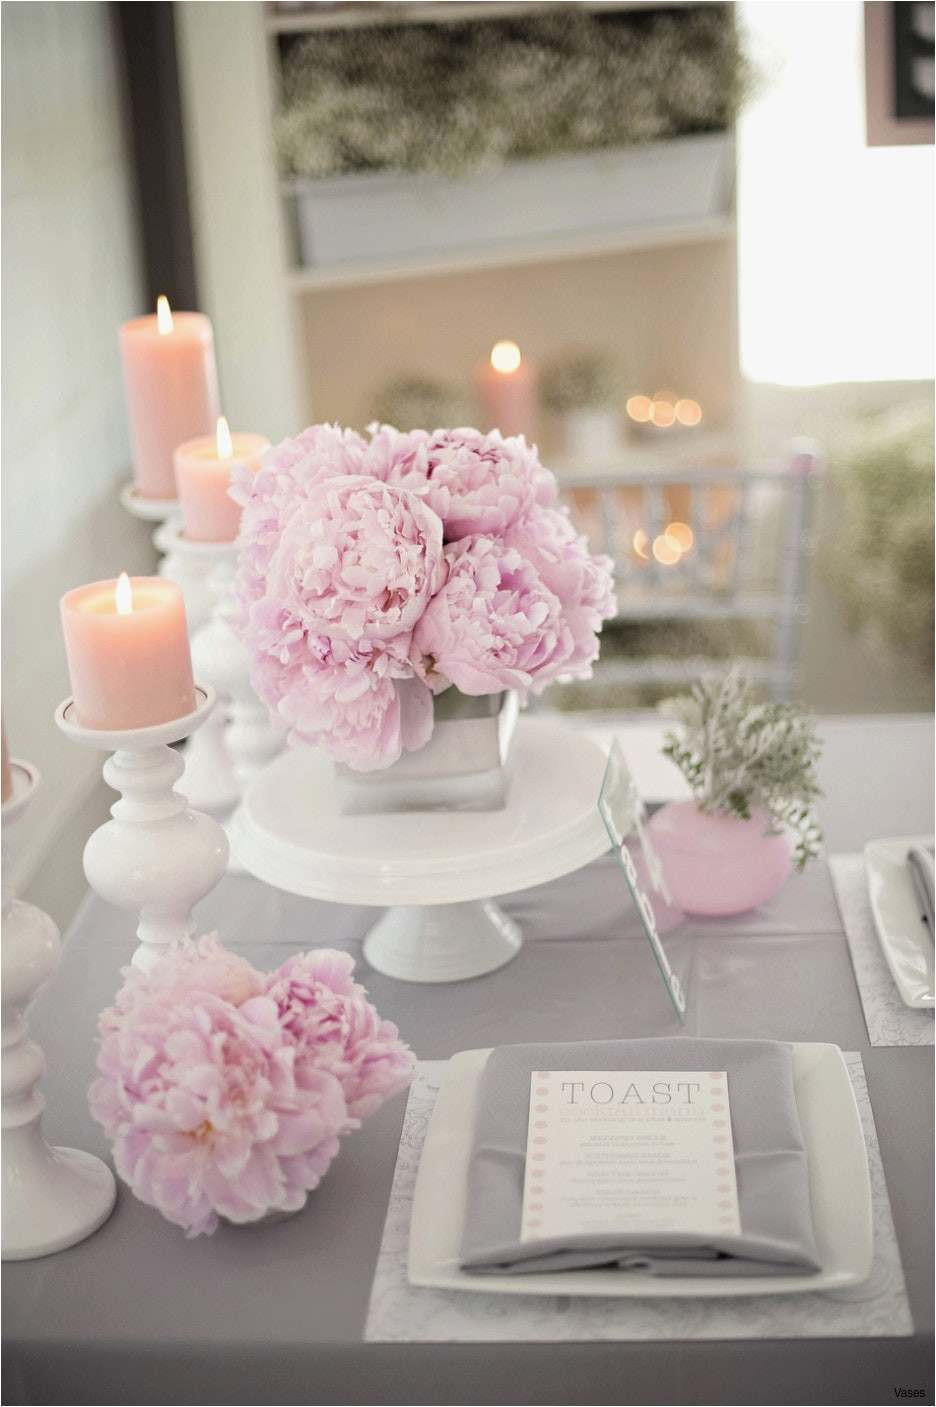 27 Fantastic Vase Table Centerpiece Ideas 2024 free download vase table centerpiece ideas of wedding items awesome dsc h vases square centerpiece dsc i 0d cheap intended for wedding items beautiful dsc h vases square centerpiece dsc i 0d cheap tall de